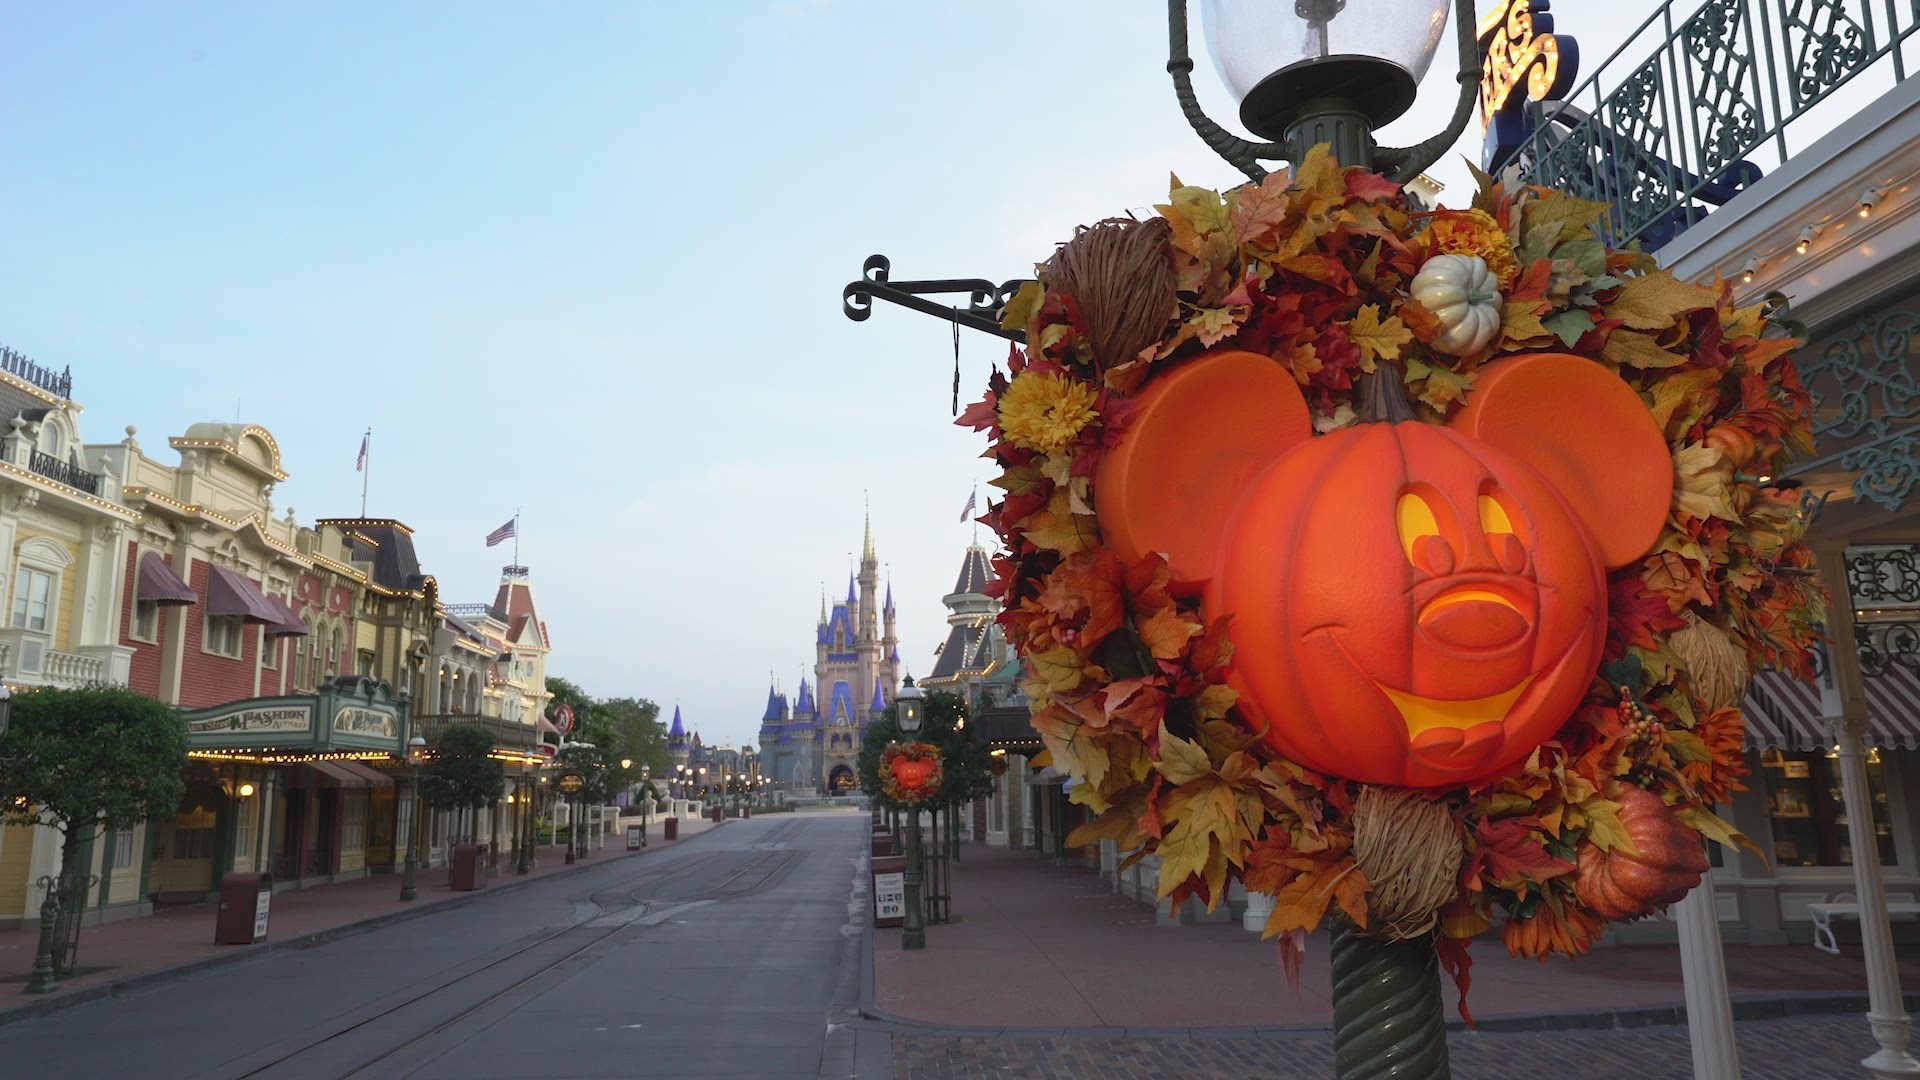 The Magic Kingdom is getting in the mood for autumn, with Mickey pumpkin wreaths adorning Main Street USA.